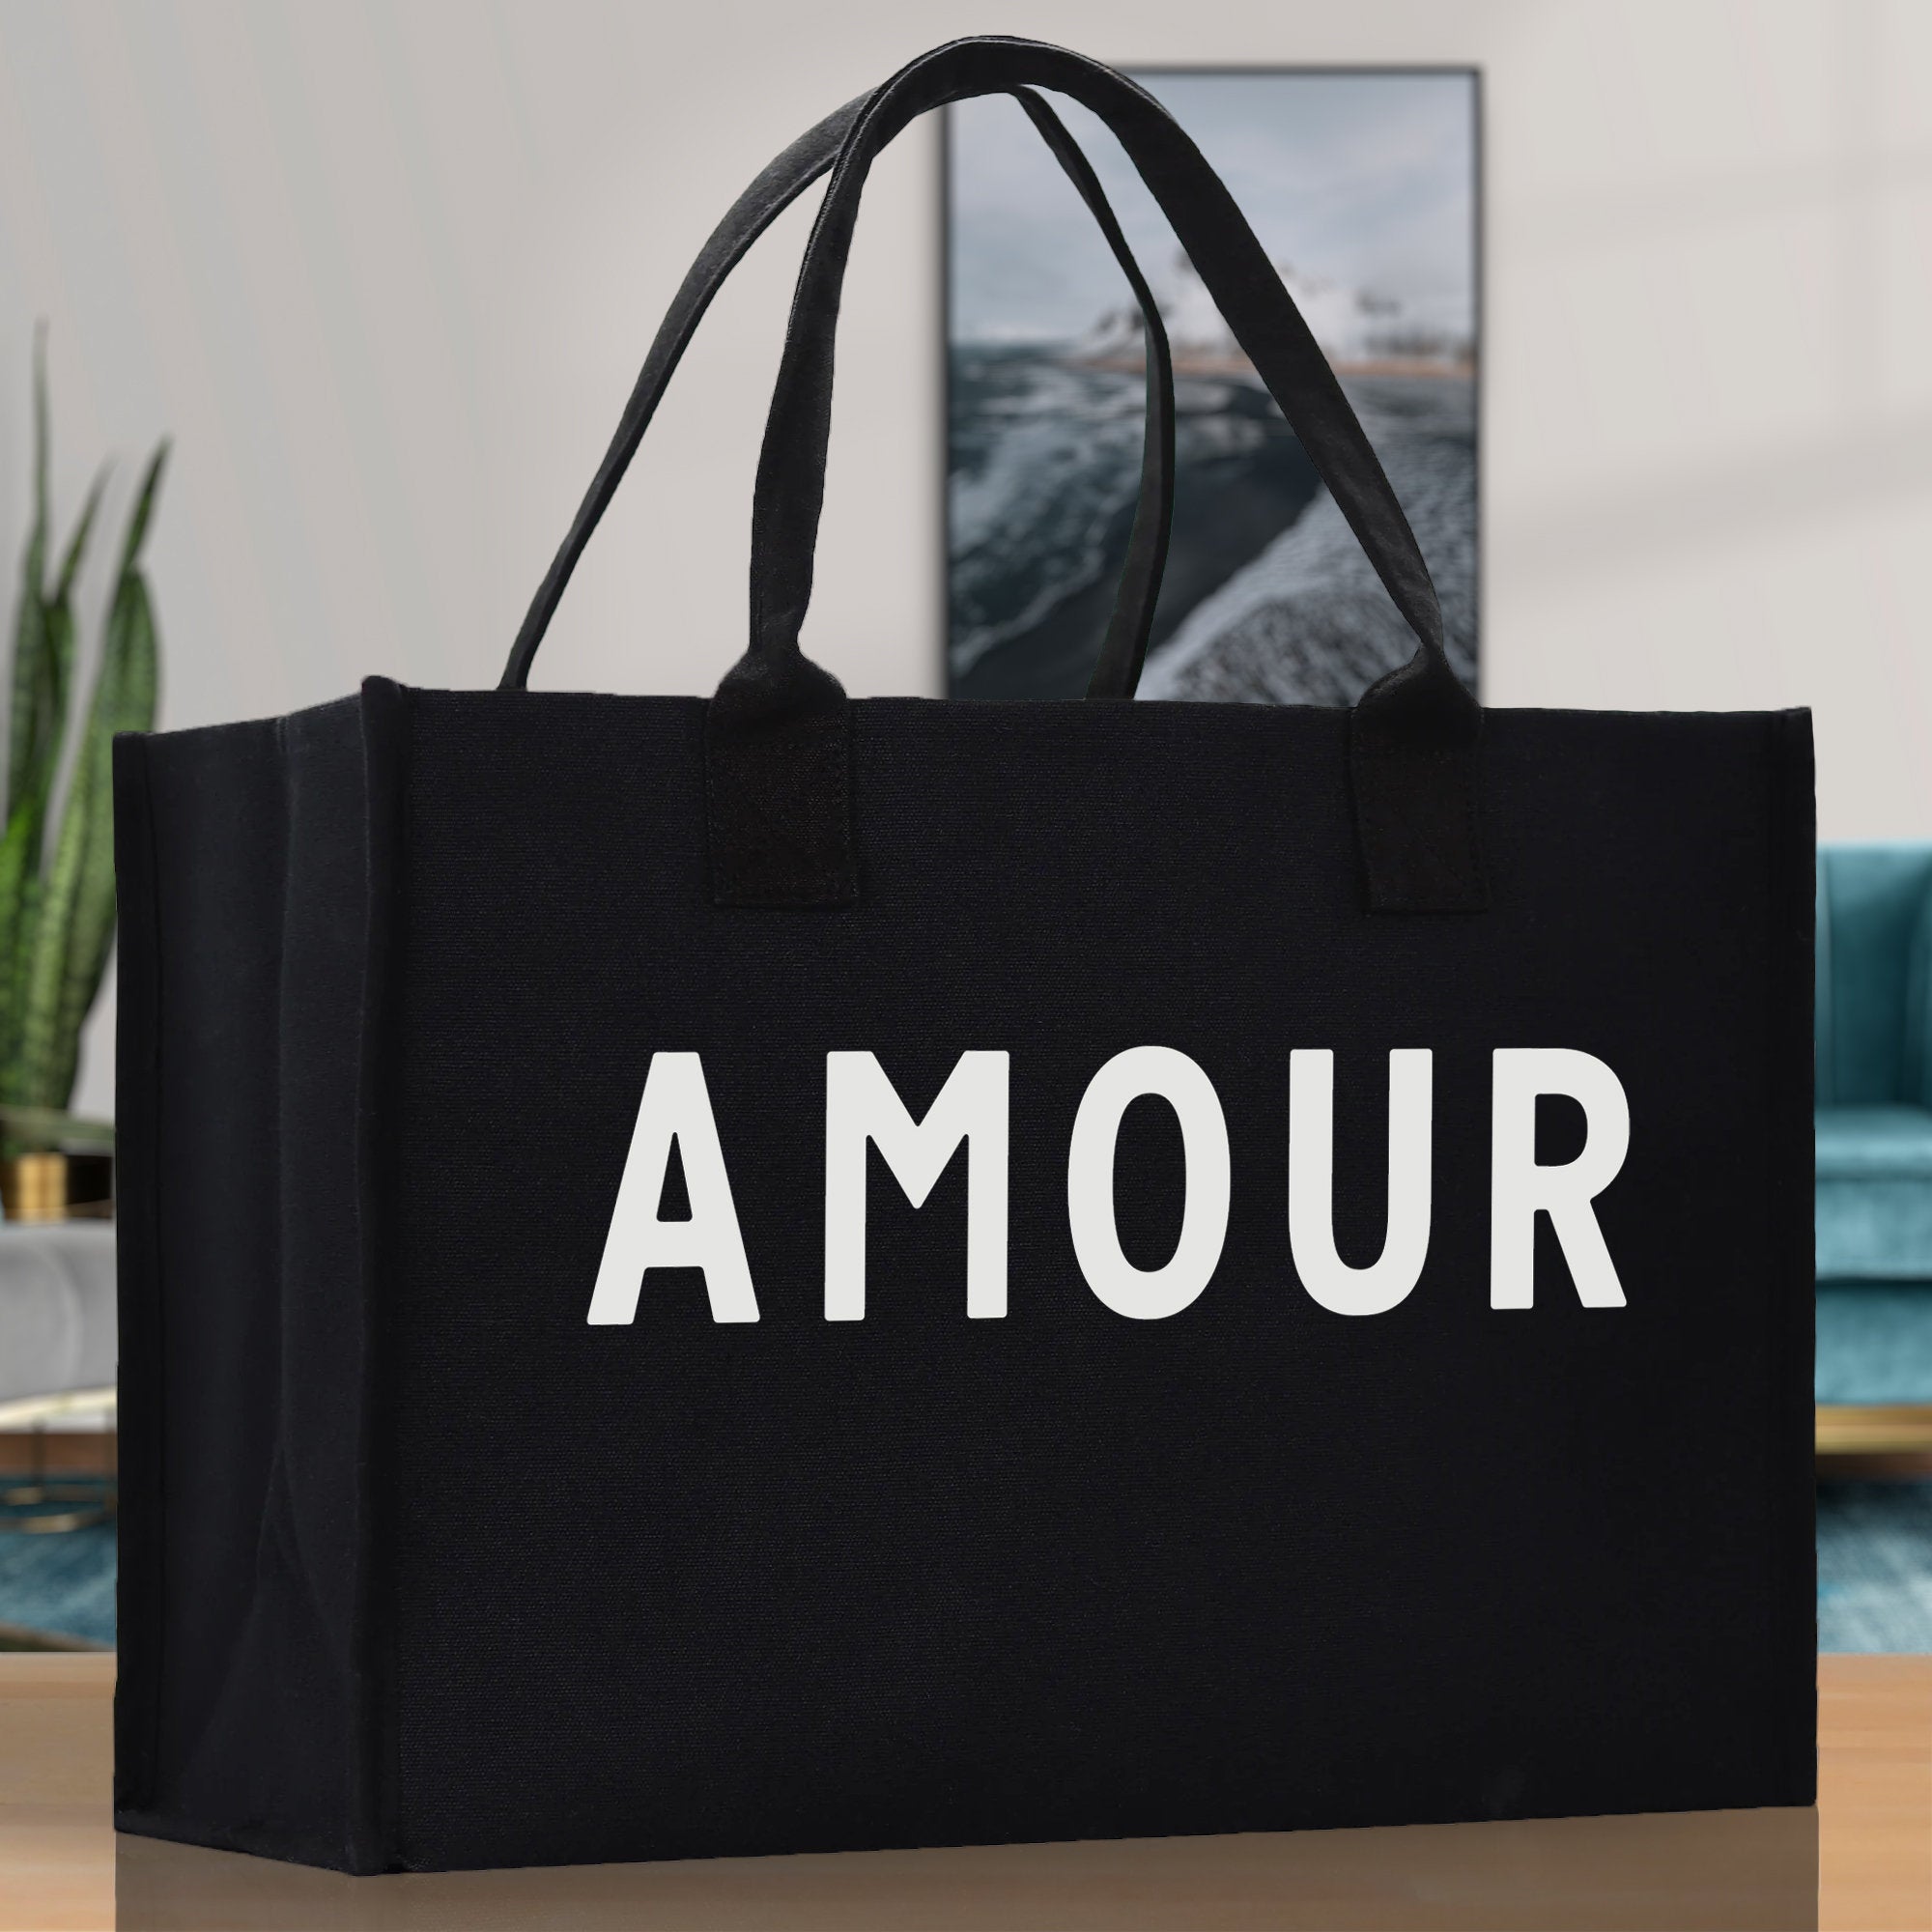 Amour Cotton Canvas Chic Beach Tote Bag Multipurpose Tote Weekender Tote Gift for Her Outdoor Tote Vacation Tote Large Beach Bag